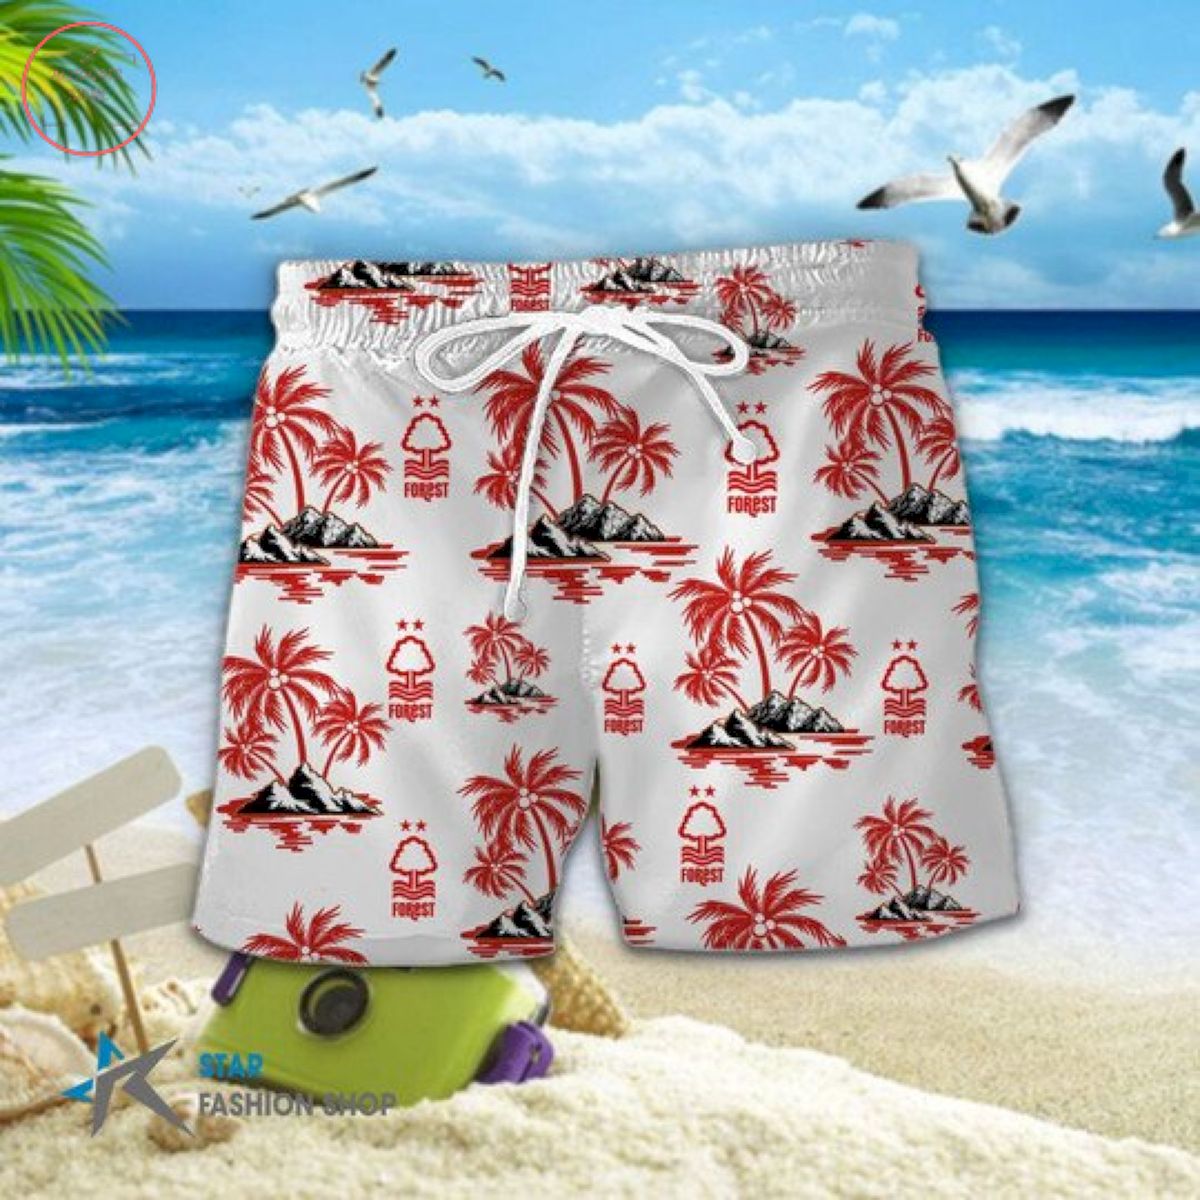 EPL Nottingham Forest Floral Hawaiian Shirts and Shorts